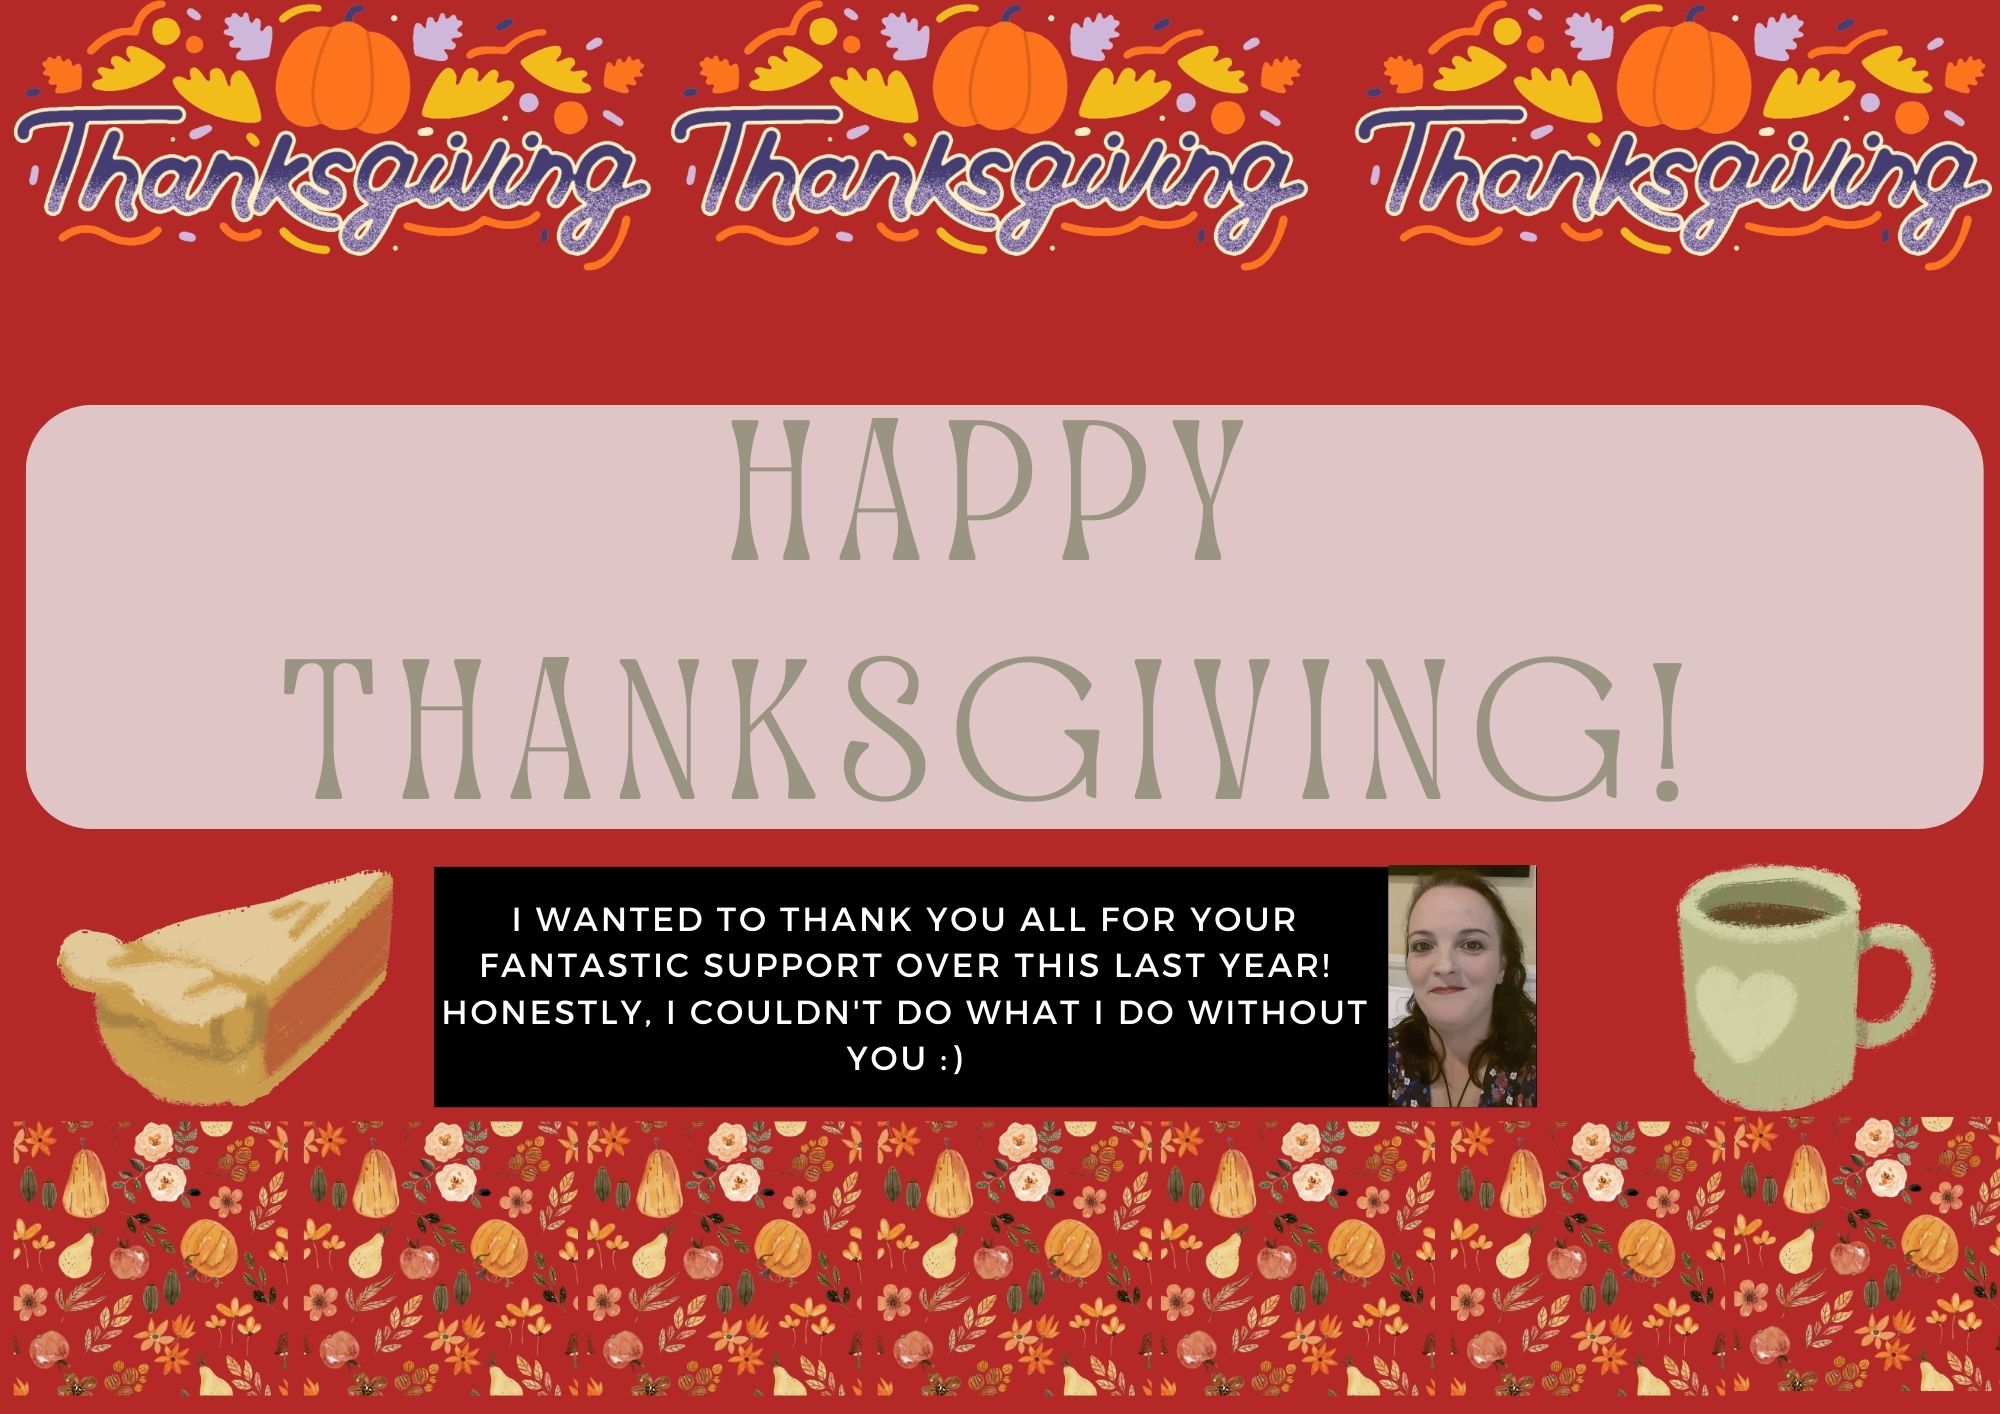 Thanksgiving banner with text: Happy Thanksgiving .. and I wanted to thank you all for your fantastic support over this last year! Honestly, I couldn't do what I do without you :) 